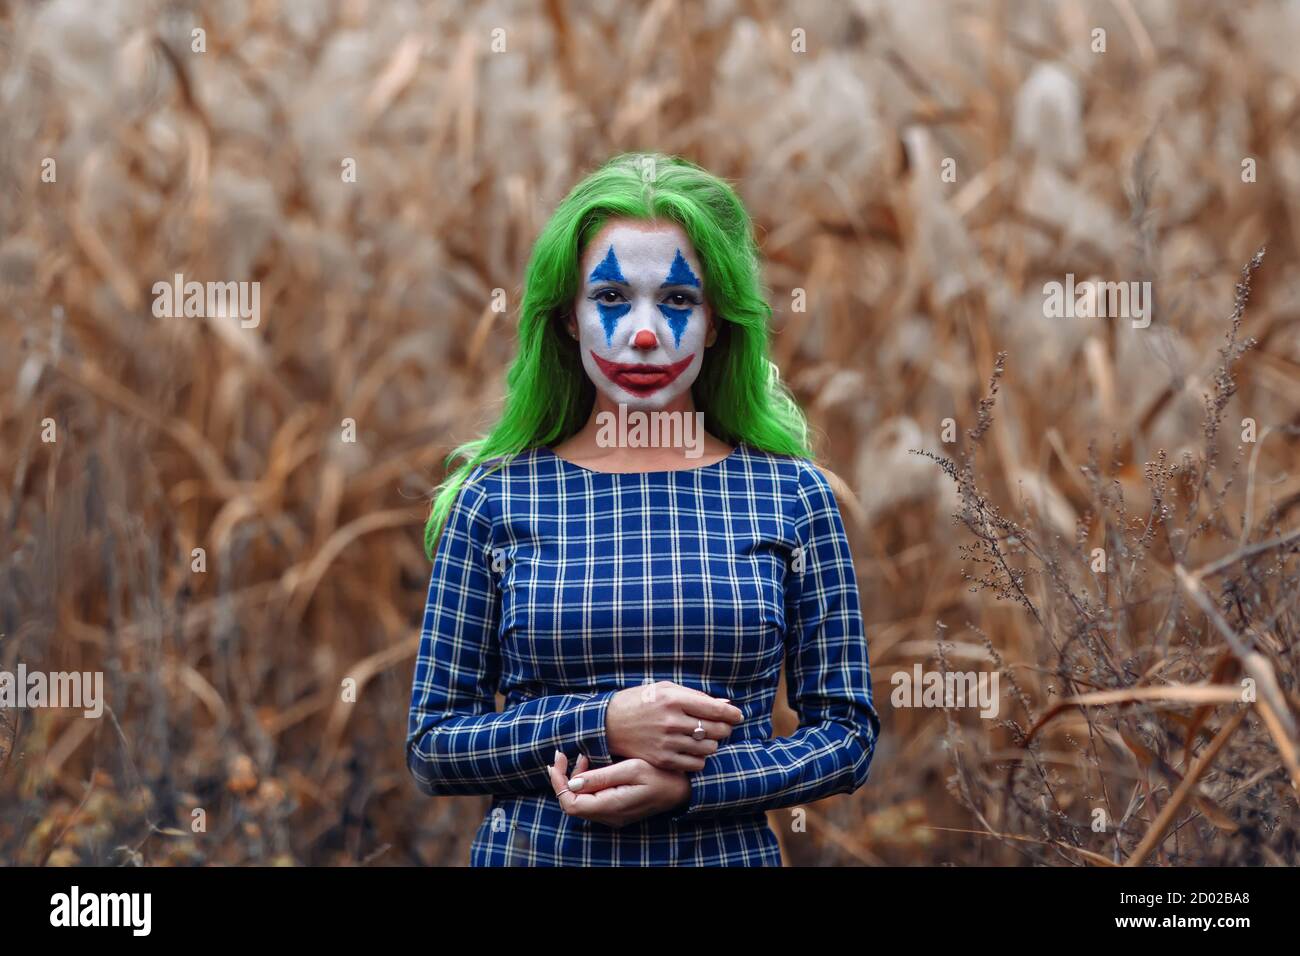 Portrait of a greenhaired girl with joker makeup on a orange ...